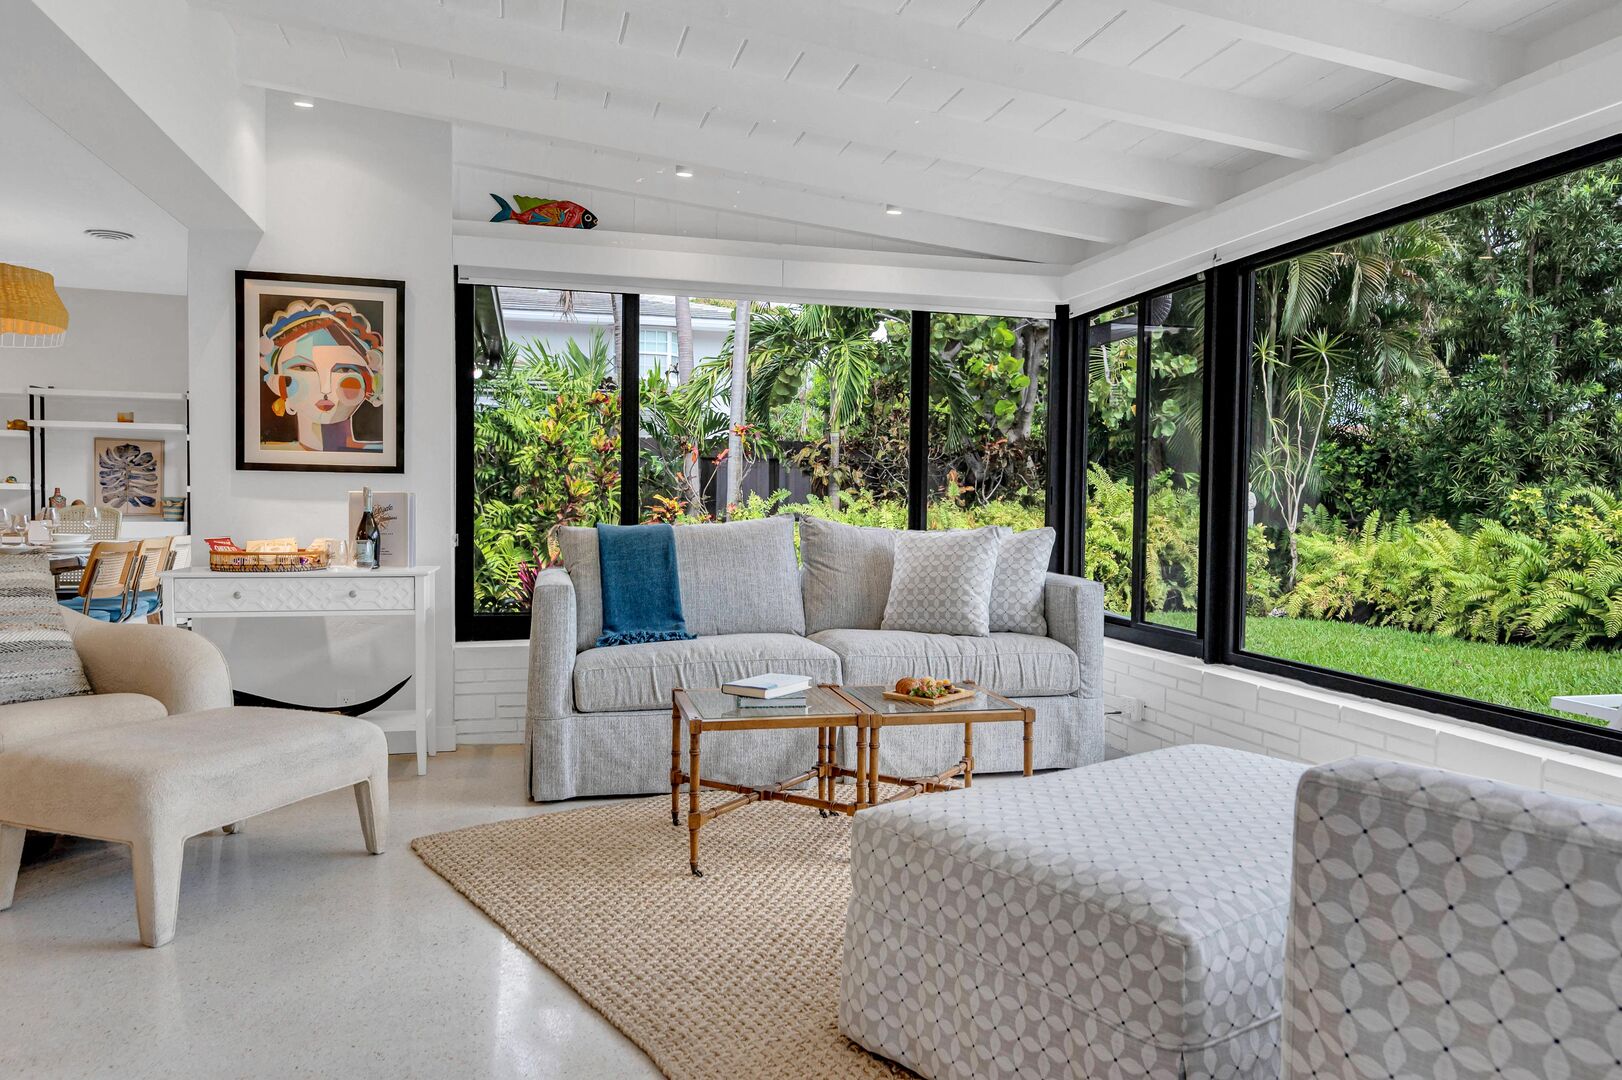 The sunroom is  the perfect setting to unwind with calming views of the lush garden and pool.